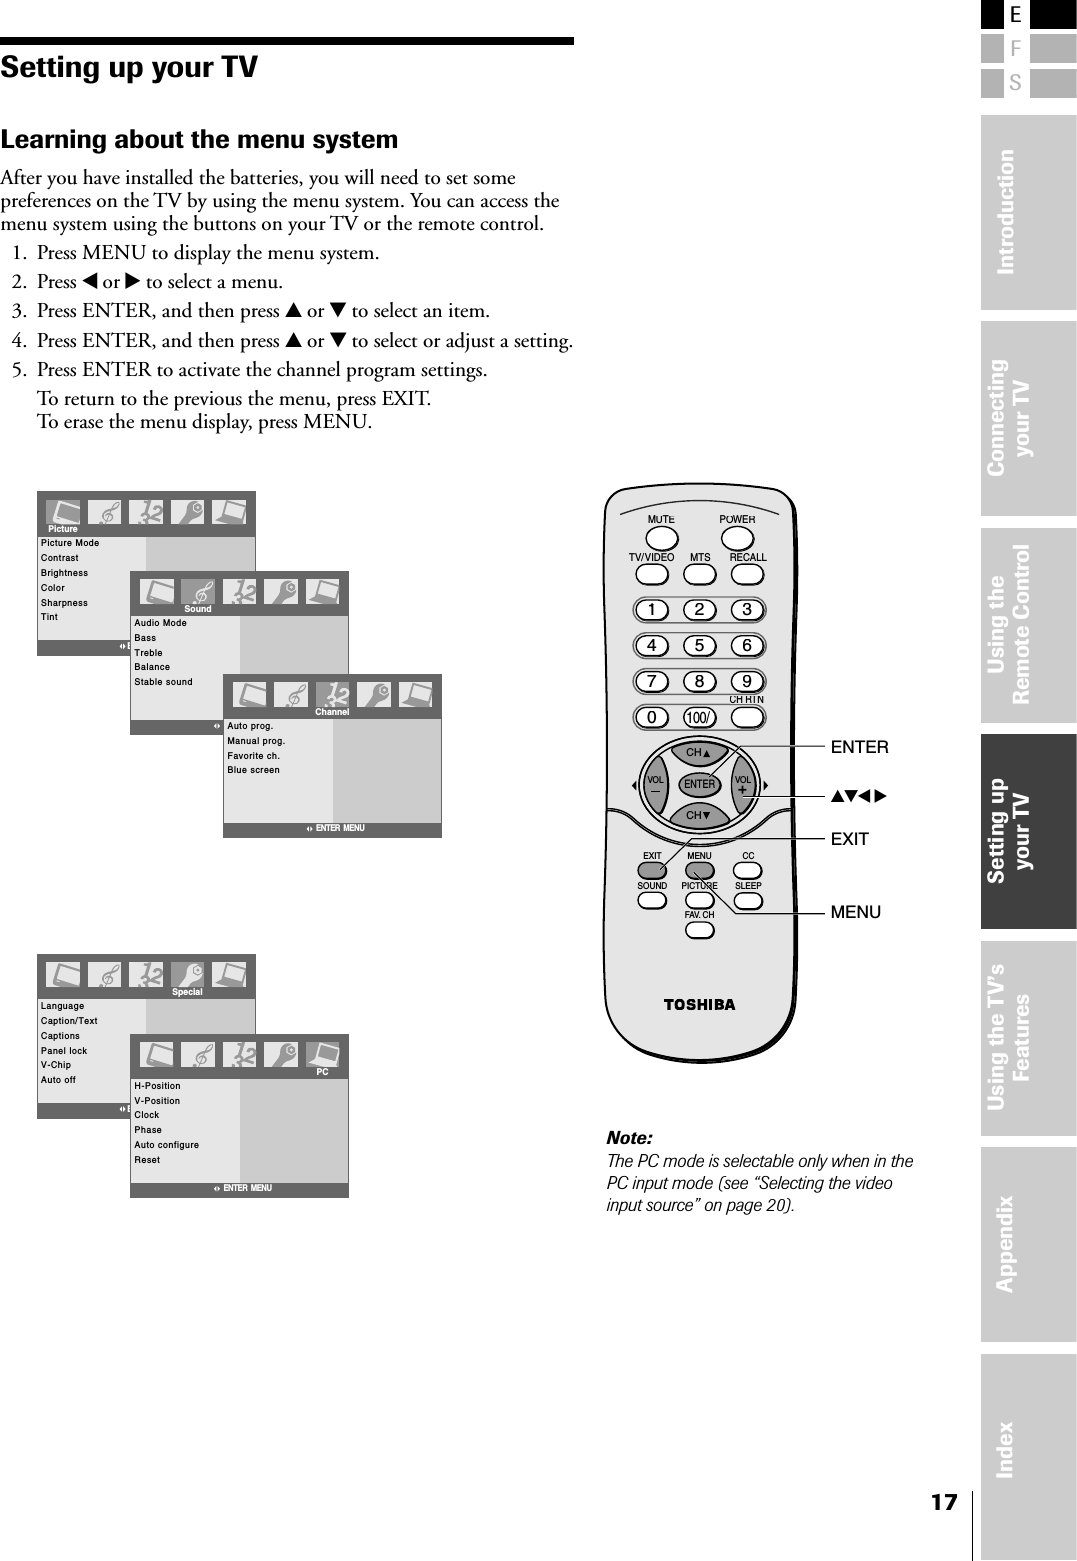 ESFConnectingyour TVUsing theRemote ControlSetting upyour TVUsing the TV’sFeaturesAppendixIndex Introduction17Setting up your TVLearning about the menu systemAfter you have installed the batteries, you will need to set somepreferences on the TV by using the menu system. You can access themenu system using the buttons on your TV or the remote control.1. Press MENU to display the menu system.2. Press x or • to select a menu.3. Press ENTER, and then press y or z to select an item.4. Press ENTER, and then press y or z to select or adjust a setting.5. Press ENTER to activate the channel program settings.To return to the previous the menu, press EXIT.To erase the menu display, press MENU.Picture ModeContrastBrightnessColorSharpnessTintPictureENTER  MENUAudio ModeBassTrebleBalanceStable soundENTER  MENUSoundAuto prog.Manual prog.Favorite ch.Blue screenChannelENTER  MENULanguageCaption/TextCaptionsPanel lockV-ChipAuto offSpecialENTER  MENUH-PositionV-PositionClockPhaseAuto configureResetENTER  MENUPCCHCHRECALLTV/VIDEOMUTEPOWERMTSENTERCCEXIT MENUSLEEPSOUND PICTUREFAV. CHVOL VOL21135468709100/CH RTNCyzx •ENTERMENUEXITNote:The PC mode is selectable only when in thePC input mode (see “Selecting the videoinput source” on page 20).